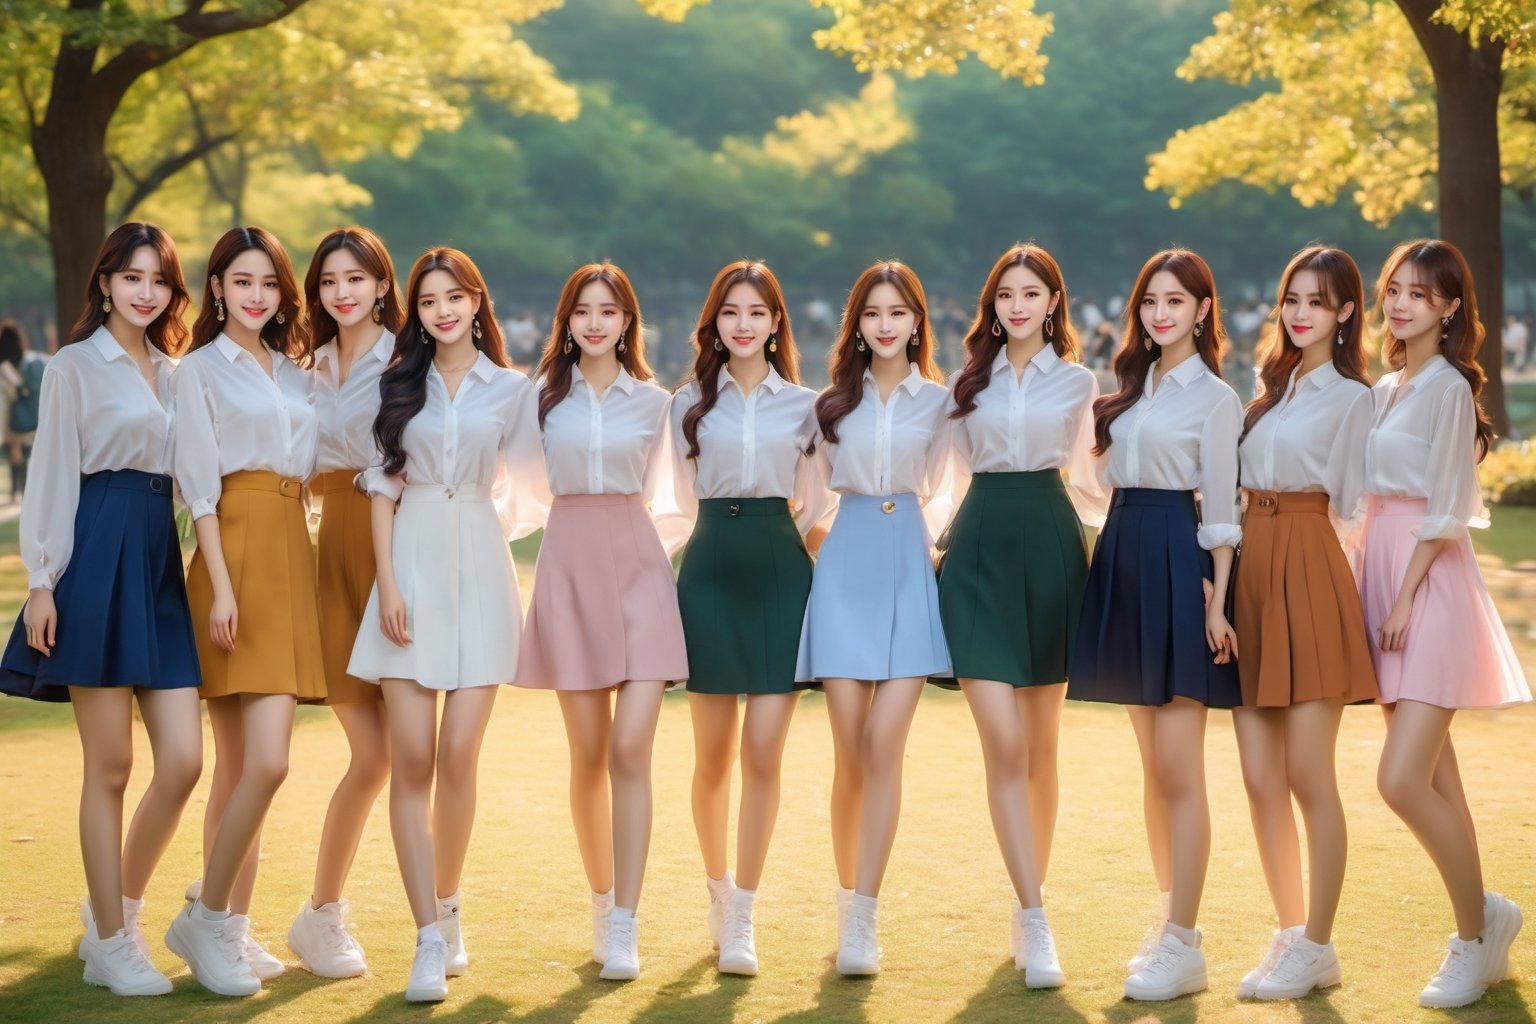 (masterpiece,best quality:1.3),(8k,raw photo,photo realistic:1.3),beautiful natural light,15girls,Group photo,k-pop,perfect face,looking_at_viewer,dress_shirt,miniskiry,at park,nice pose,smile,datailed background,good figure,hubggirl,more detail XL